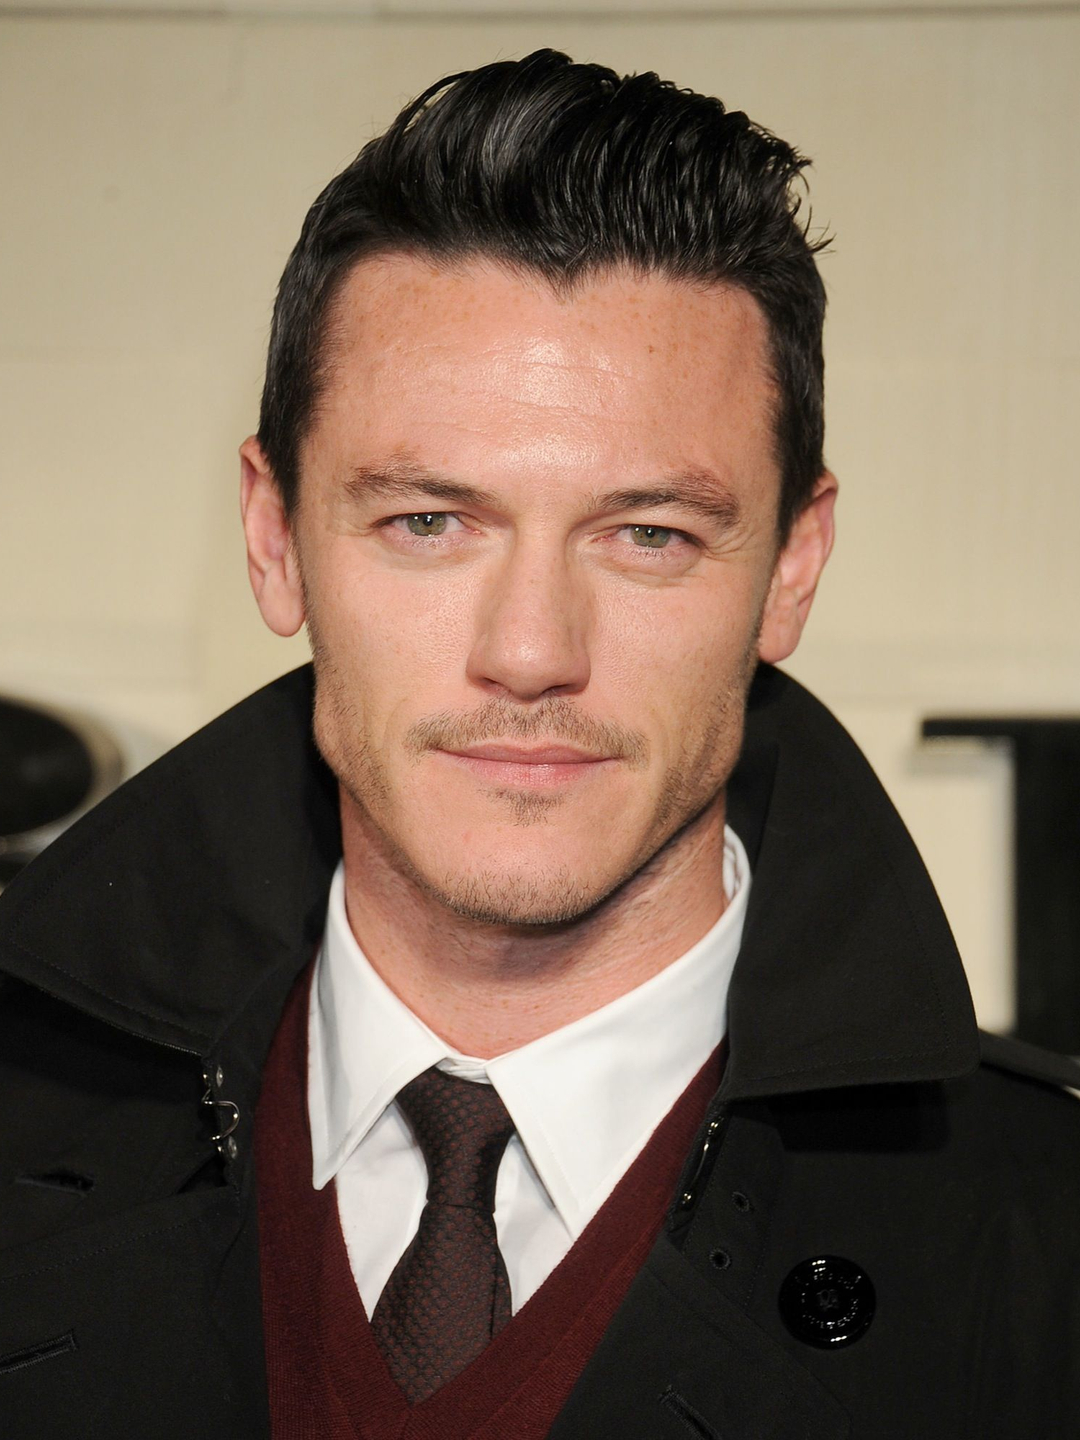 Luke Evans young age